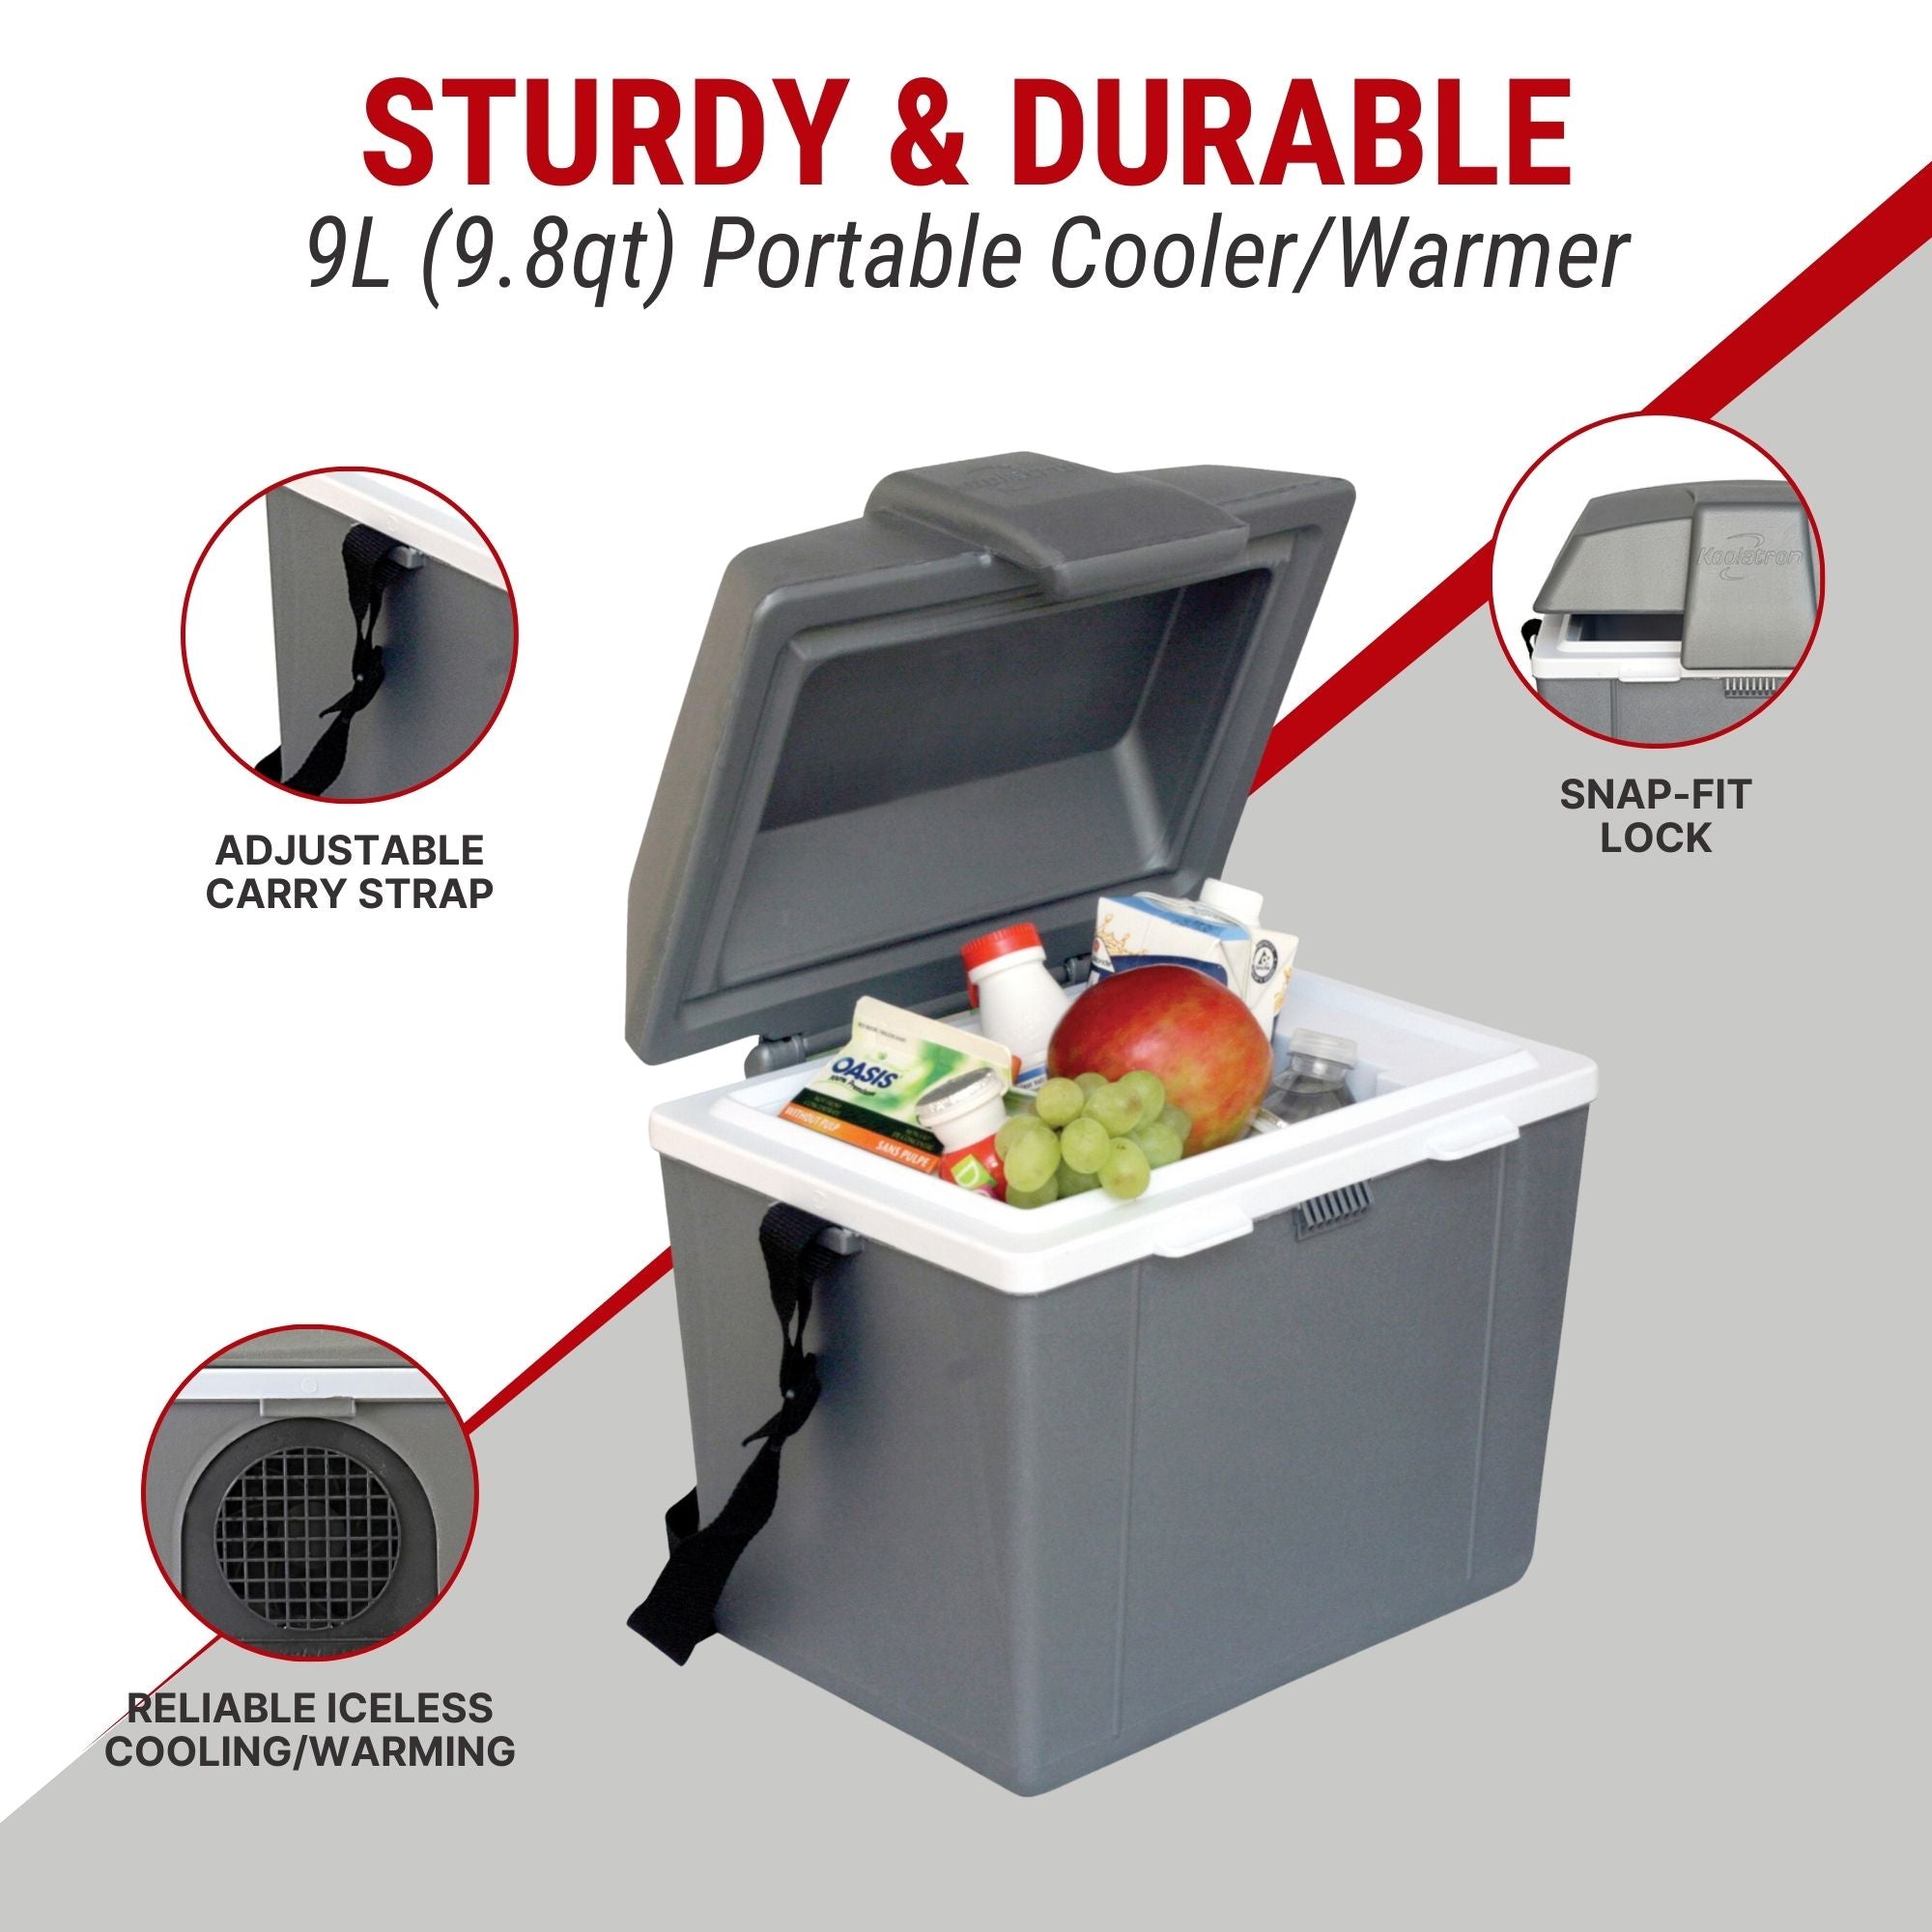 Koolatron 12V cooler/warmer open with food inside surrounded by closeup images of features, labeled: Adjustable strap; snap-fit lock; reliable iceless cooling/warming. Text above reads, "STURDY AND DURABLE 9L (9.8 qt) portable cooler/warmer"